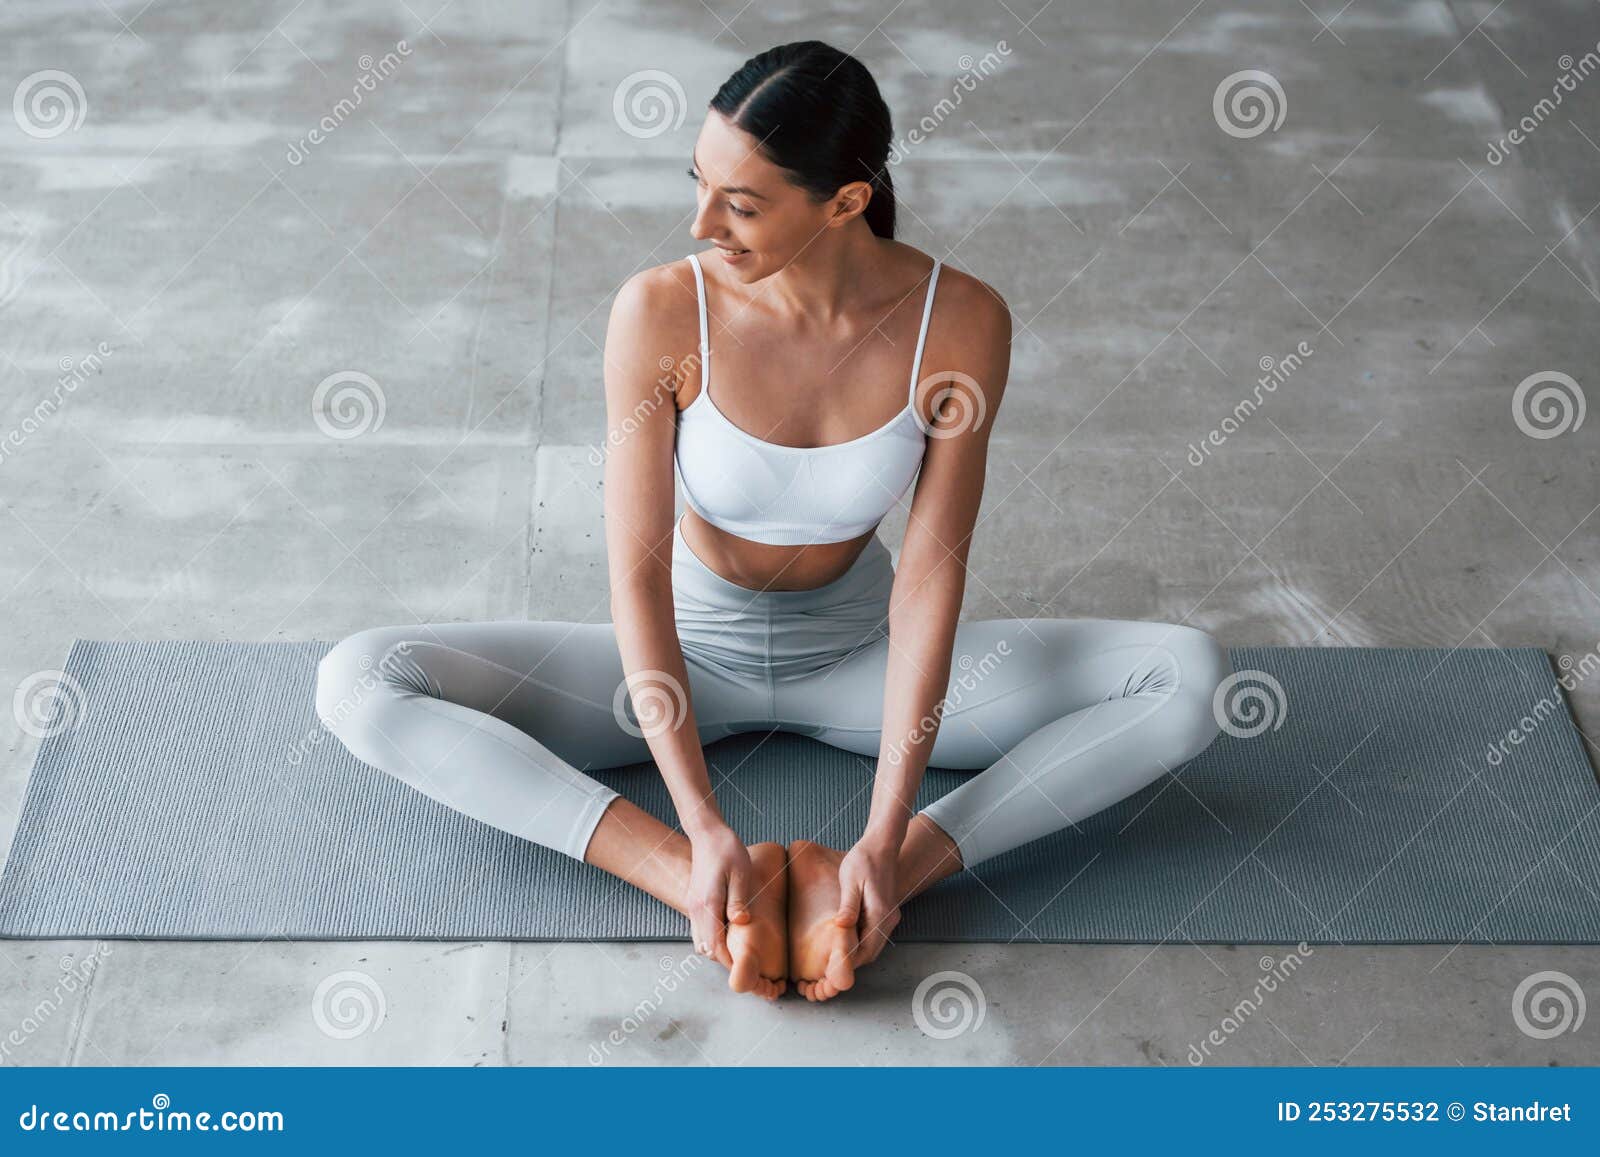 Sits on Yoga Mat. Woman with Sportive Slim Body Type in Underwear that is  in the Studio Stock Photo - Image of healthy, female: 253275532